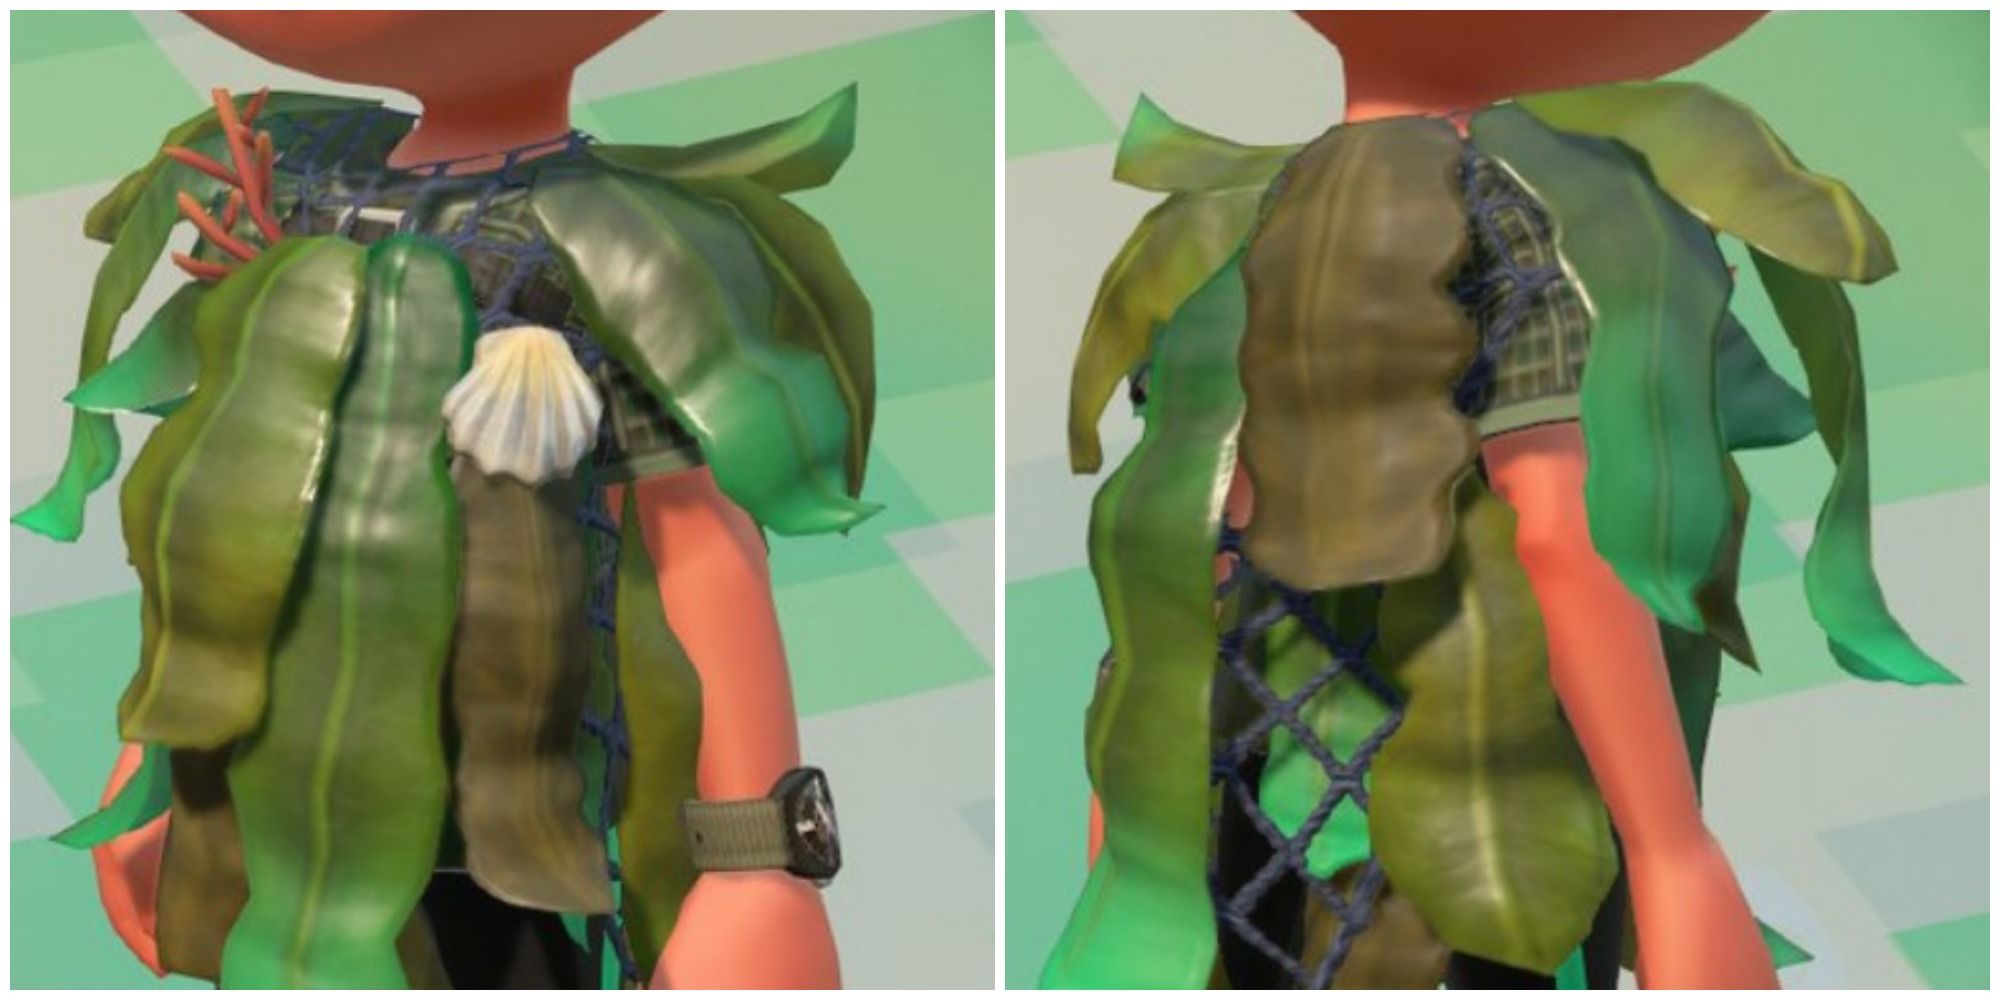 Split image of front and back Moist Ghilllie Suit, a shirt made of seaweed and netting